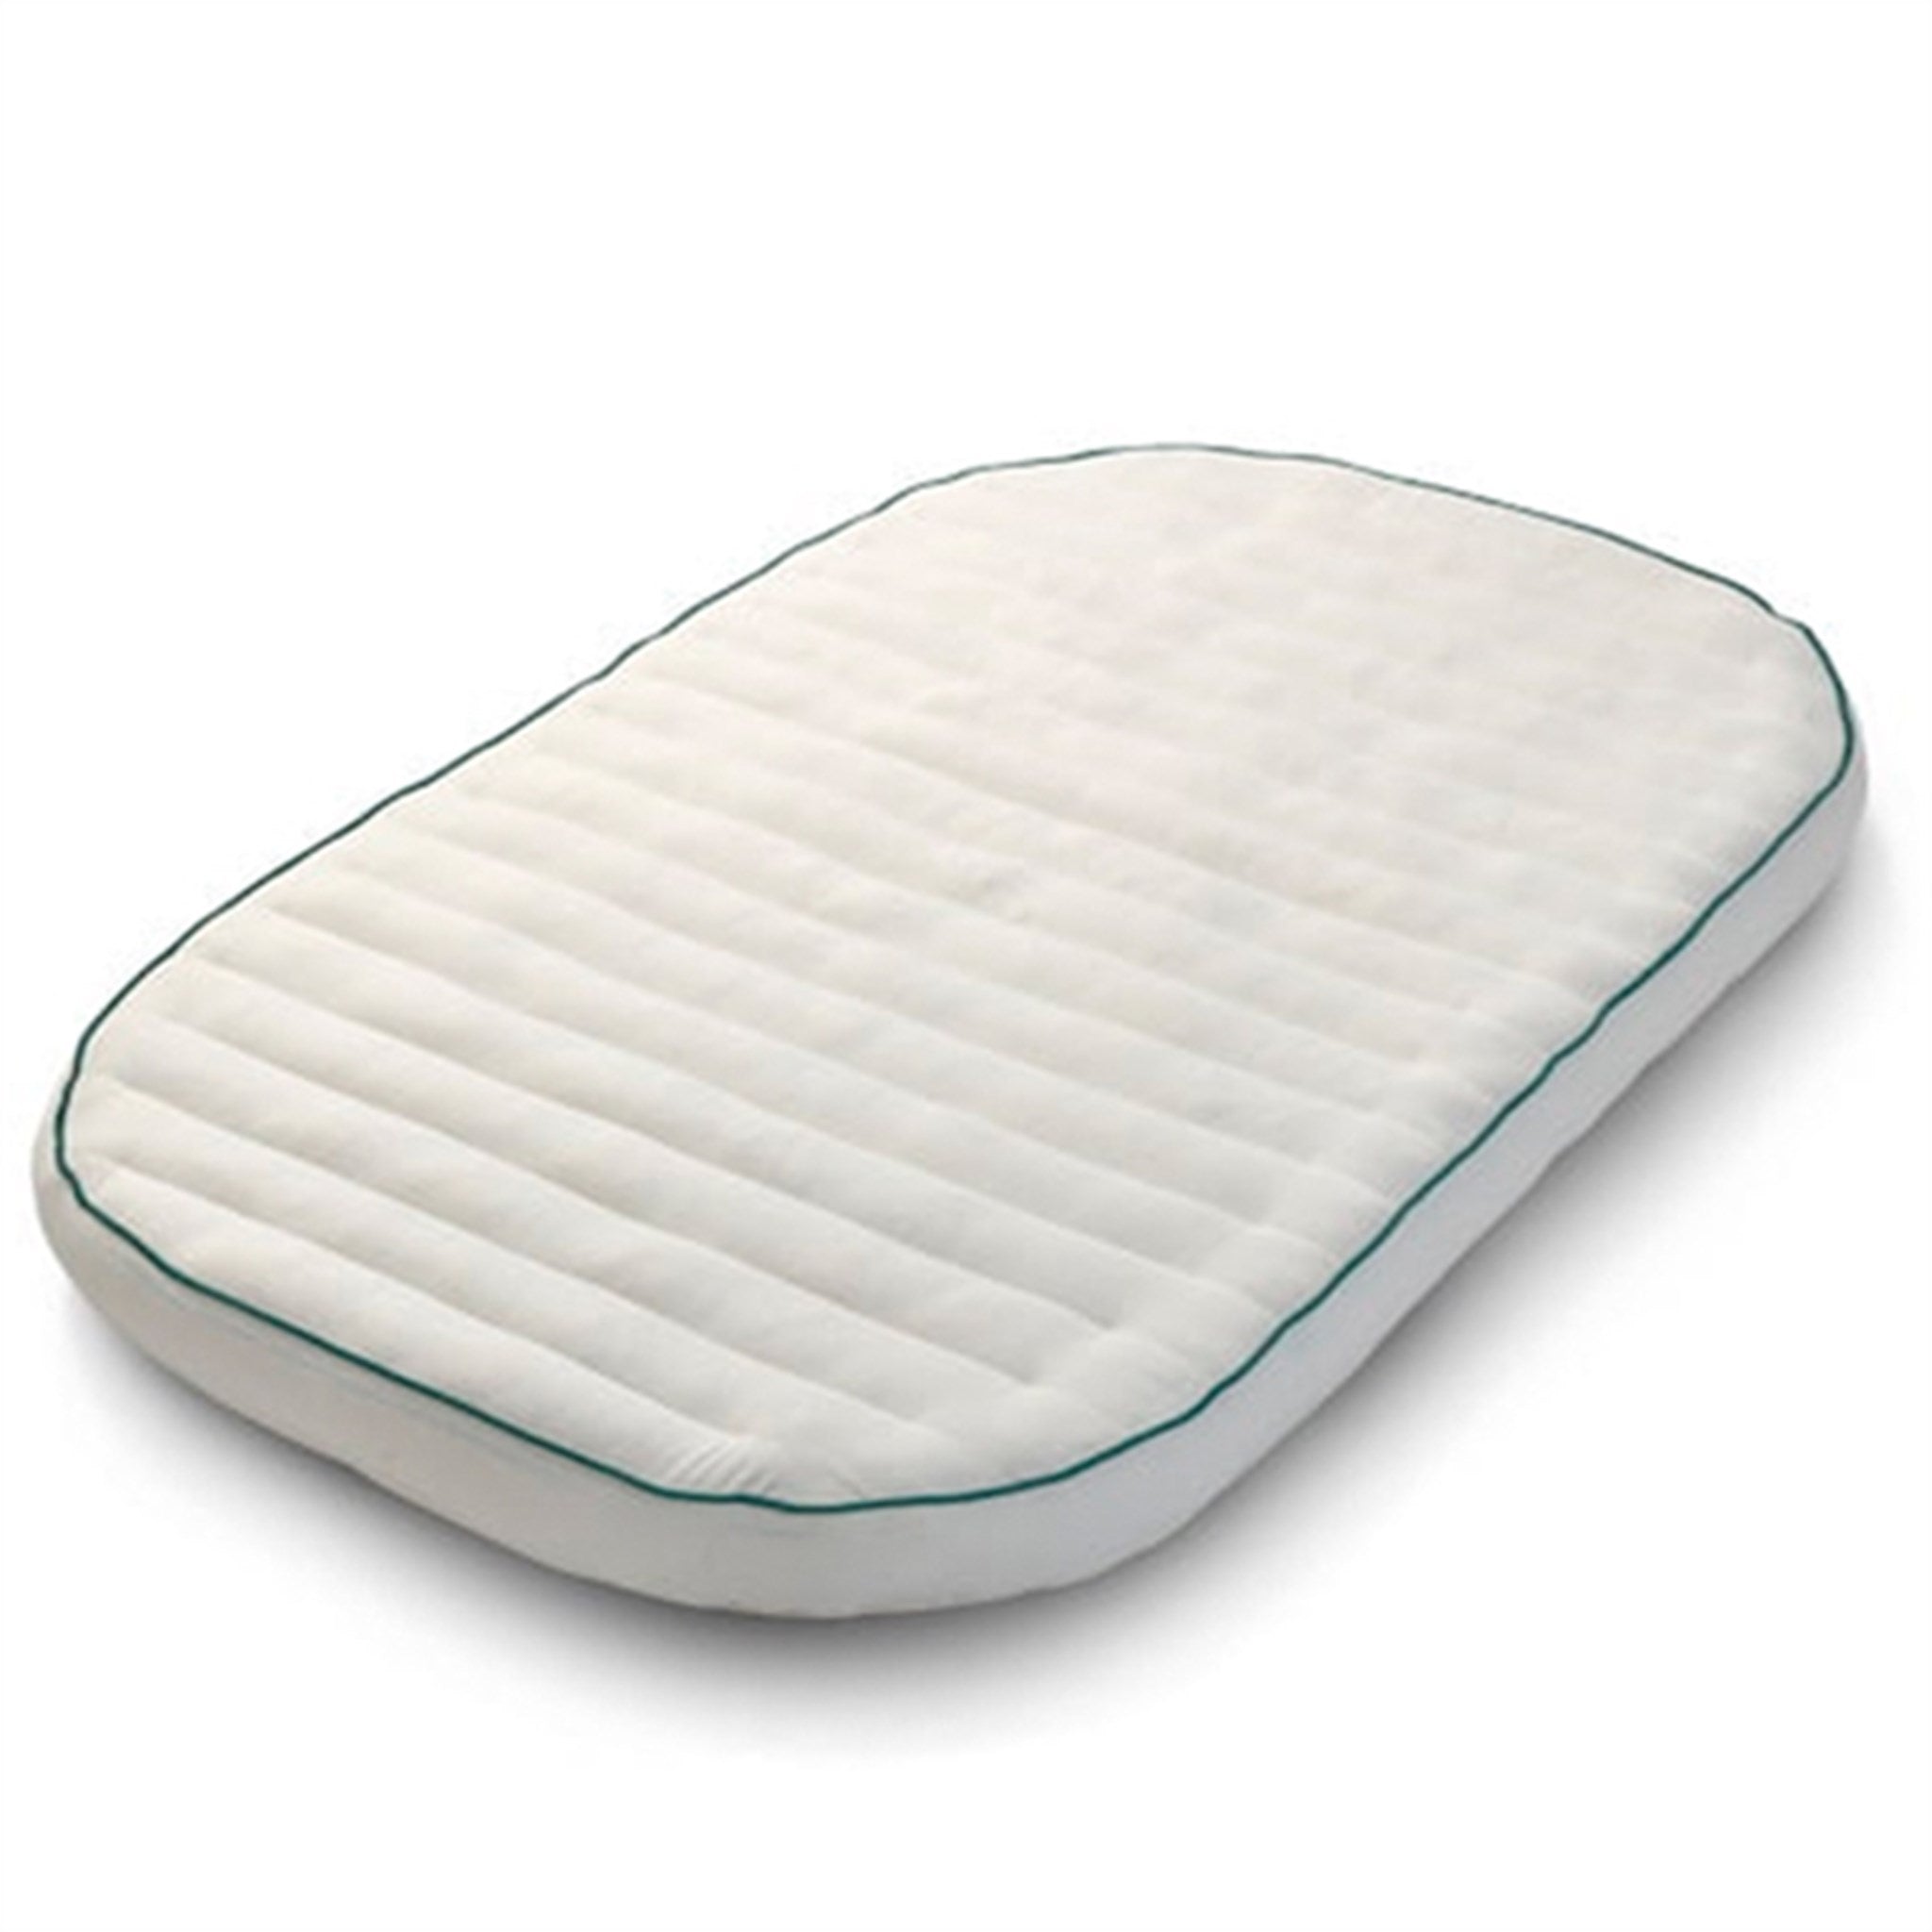 Cocoon Organic Kapok Mattress for Leander Bed